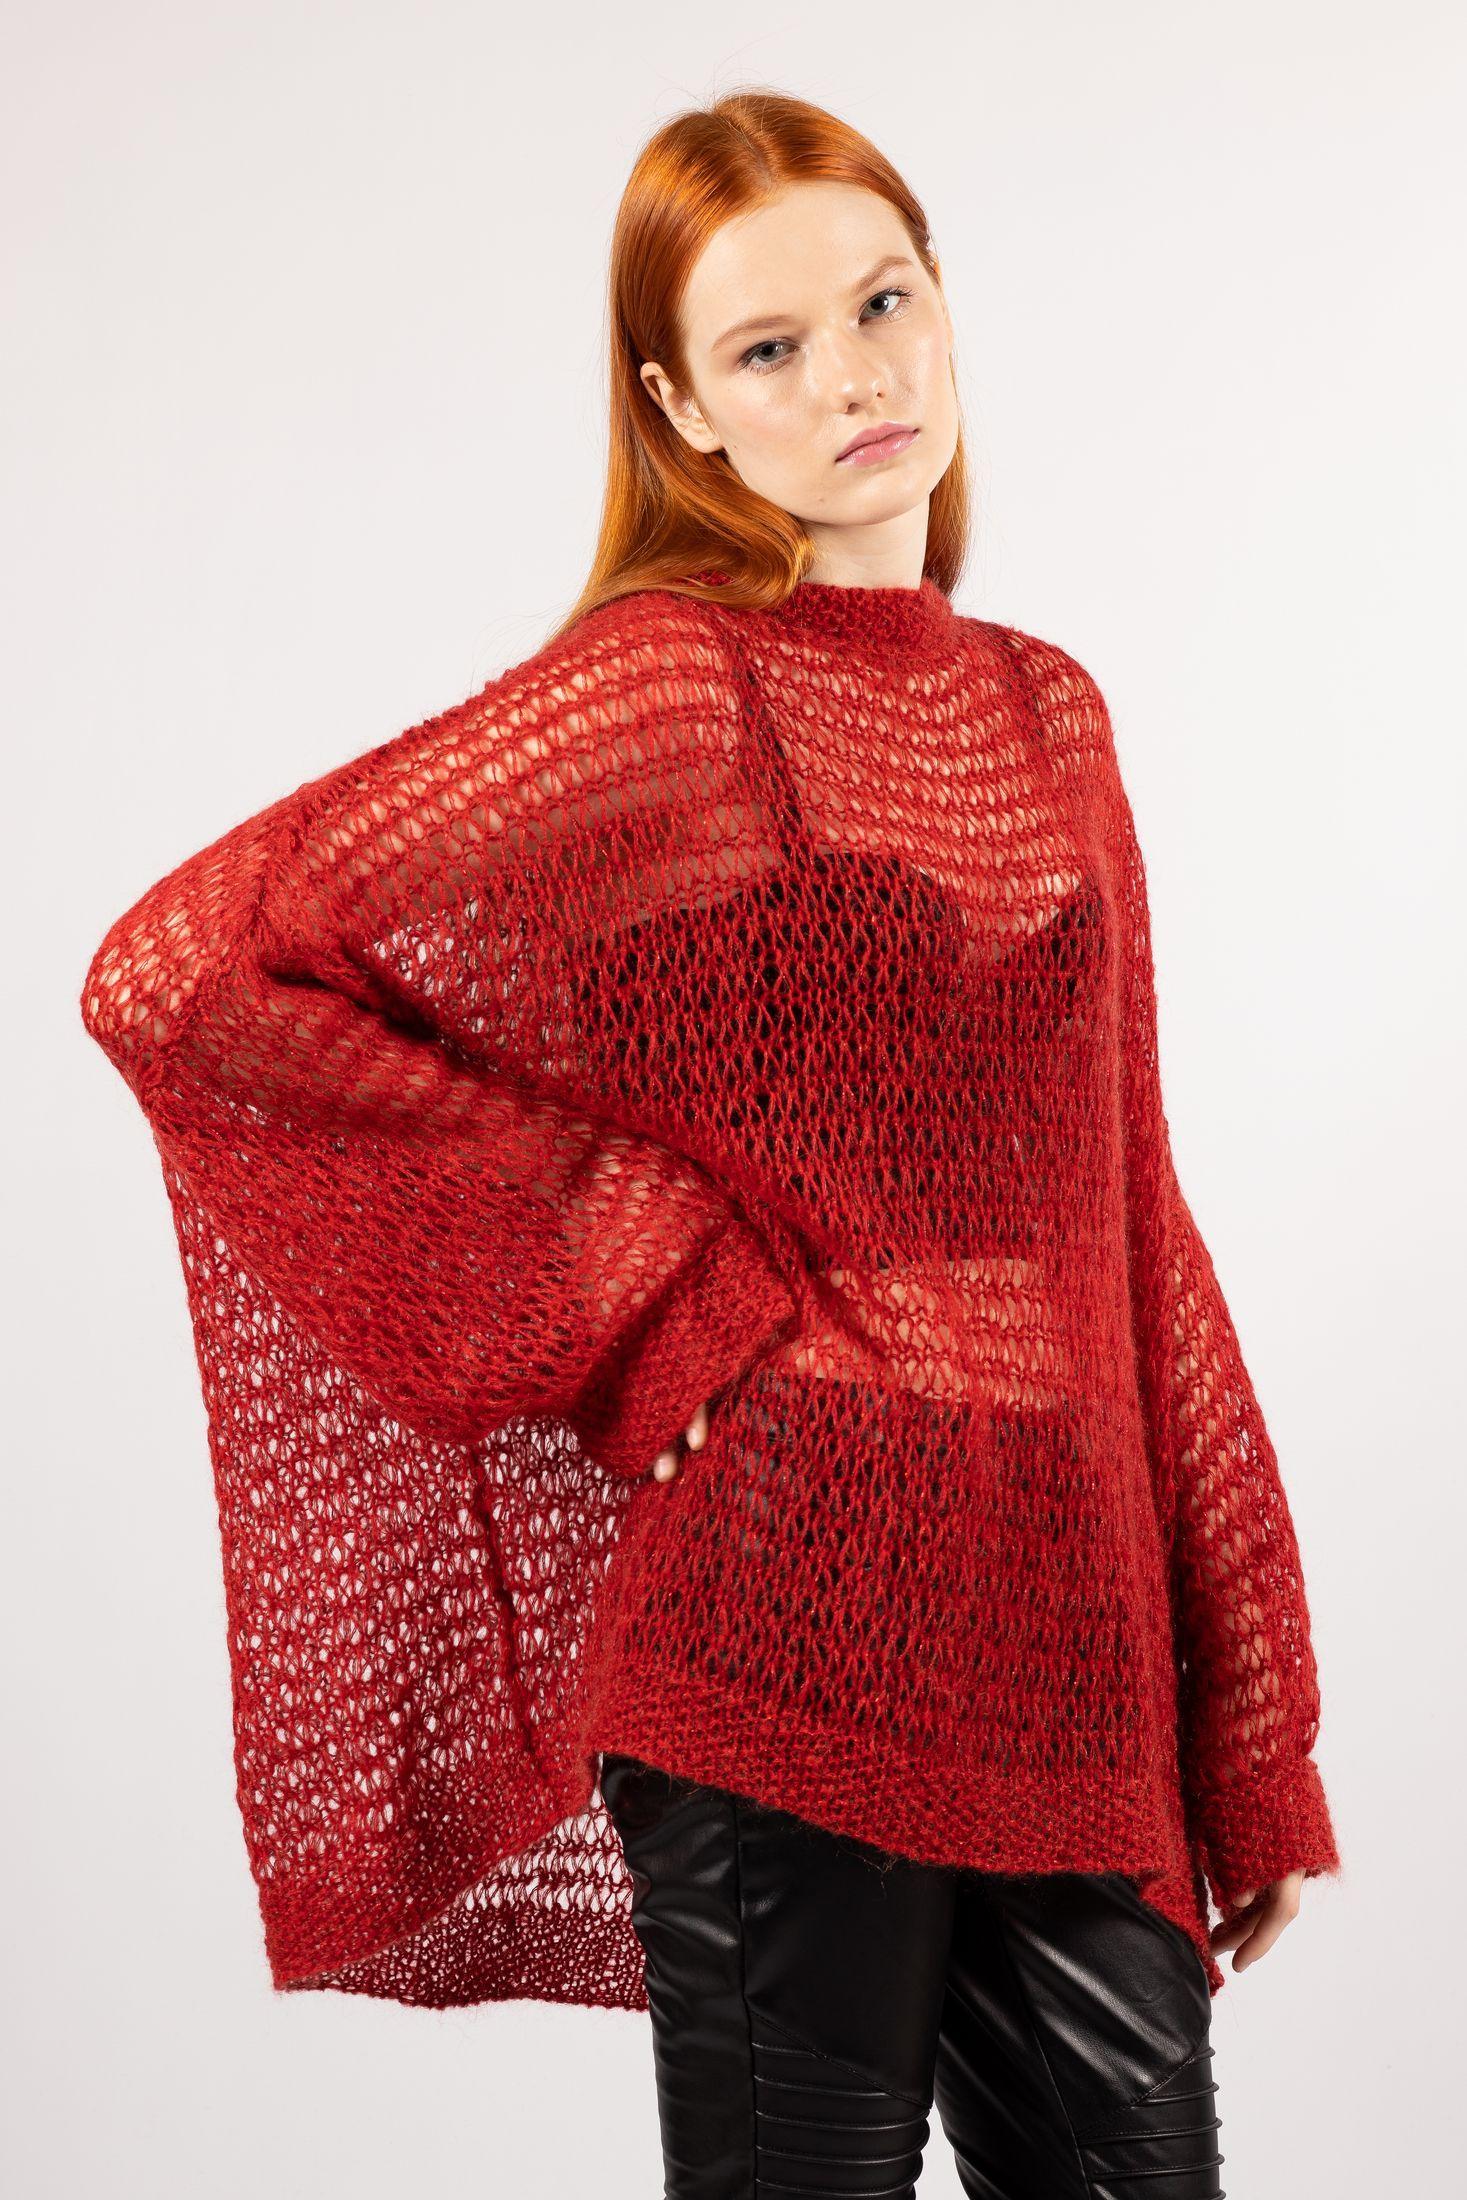 Warm and fashionable IDA red mohair sweater with a distinctive open-loop hand-knit construction